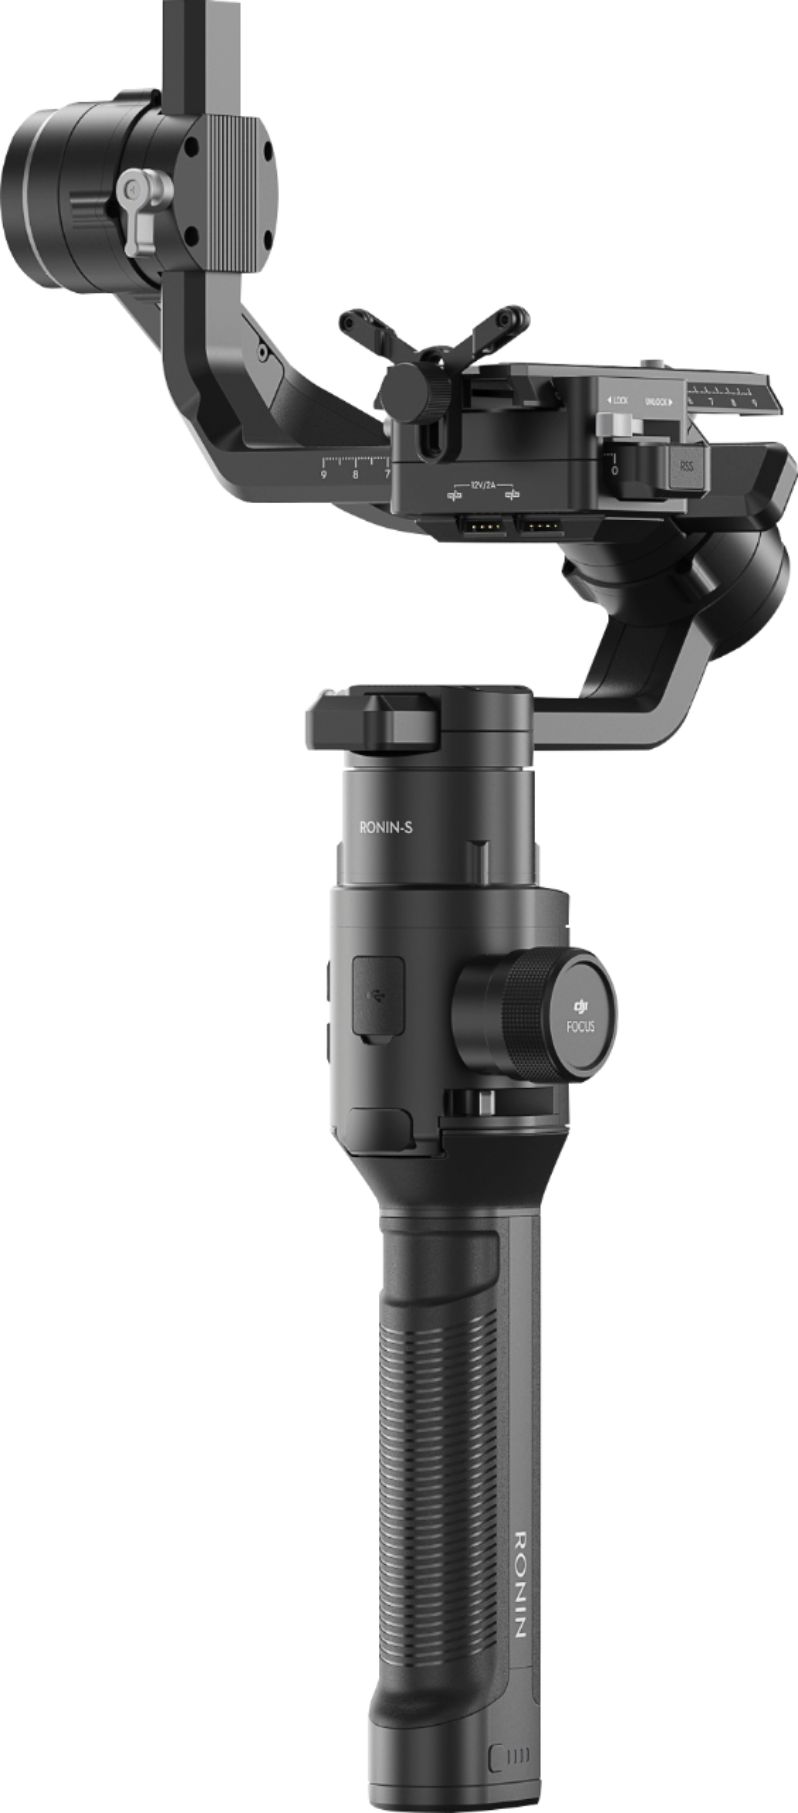 Left View: DJI - Ronin-S Handheld Gimbal Stabilizer for DSLR and Mirrorless Cameras